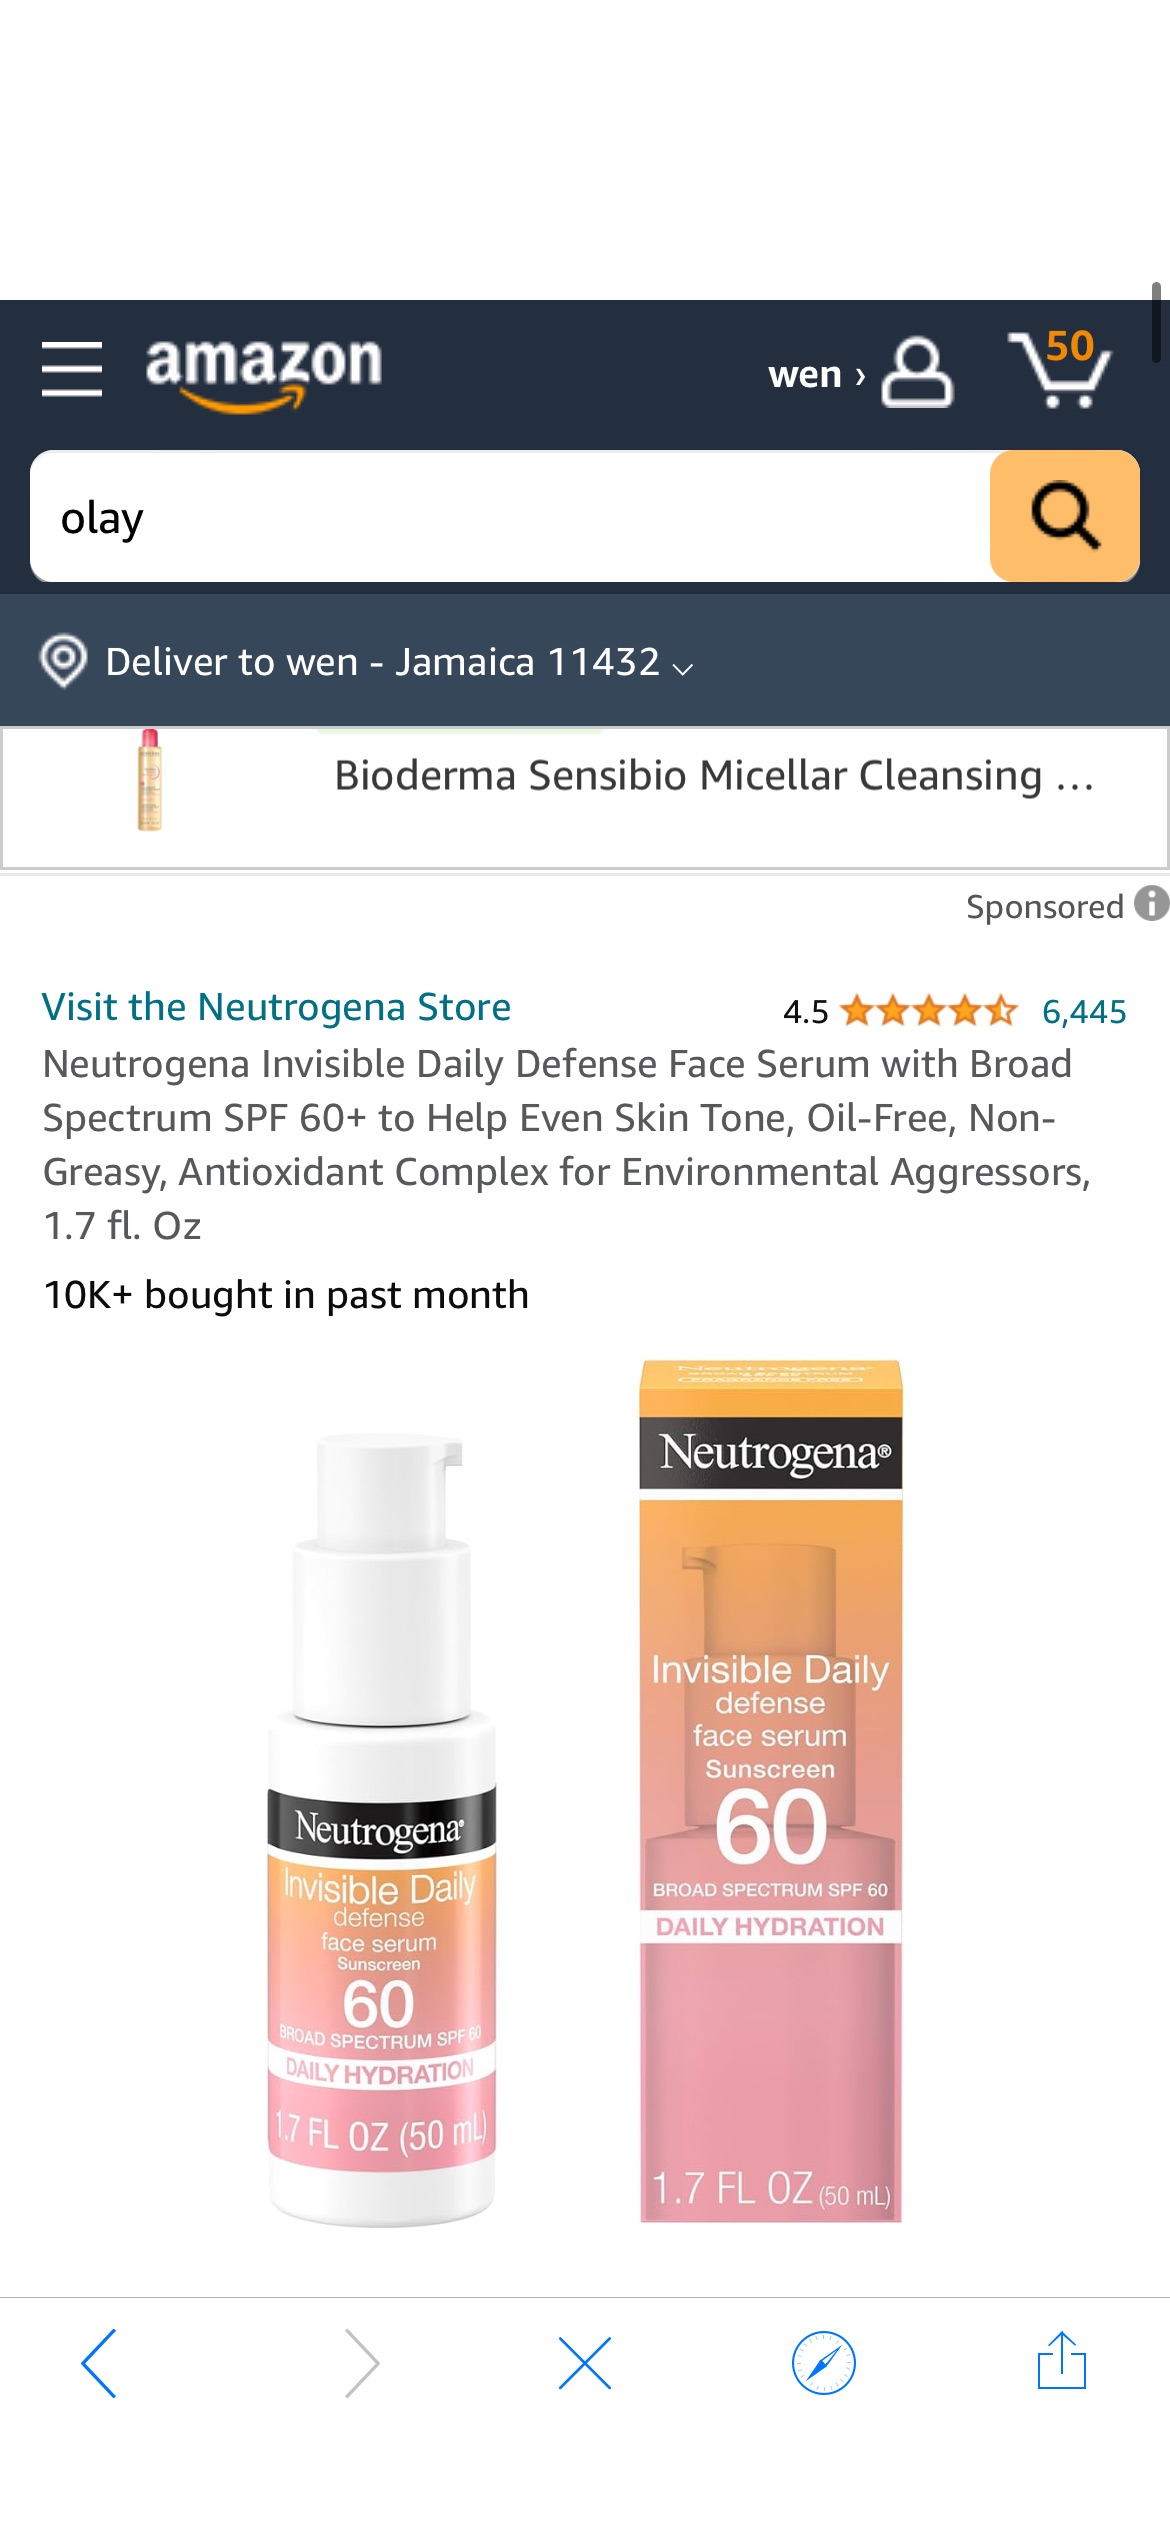 Amazon.com: Neutrogena Invisible Daily Defense Face Serum with Broad Spectrum SPF 60+ to Help Even Skin Tone, Oil-Free, Non-Greasy, Antioxidant Complex for Environmental Aggressors, 1.7 fl. Oz : Beaut